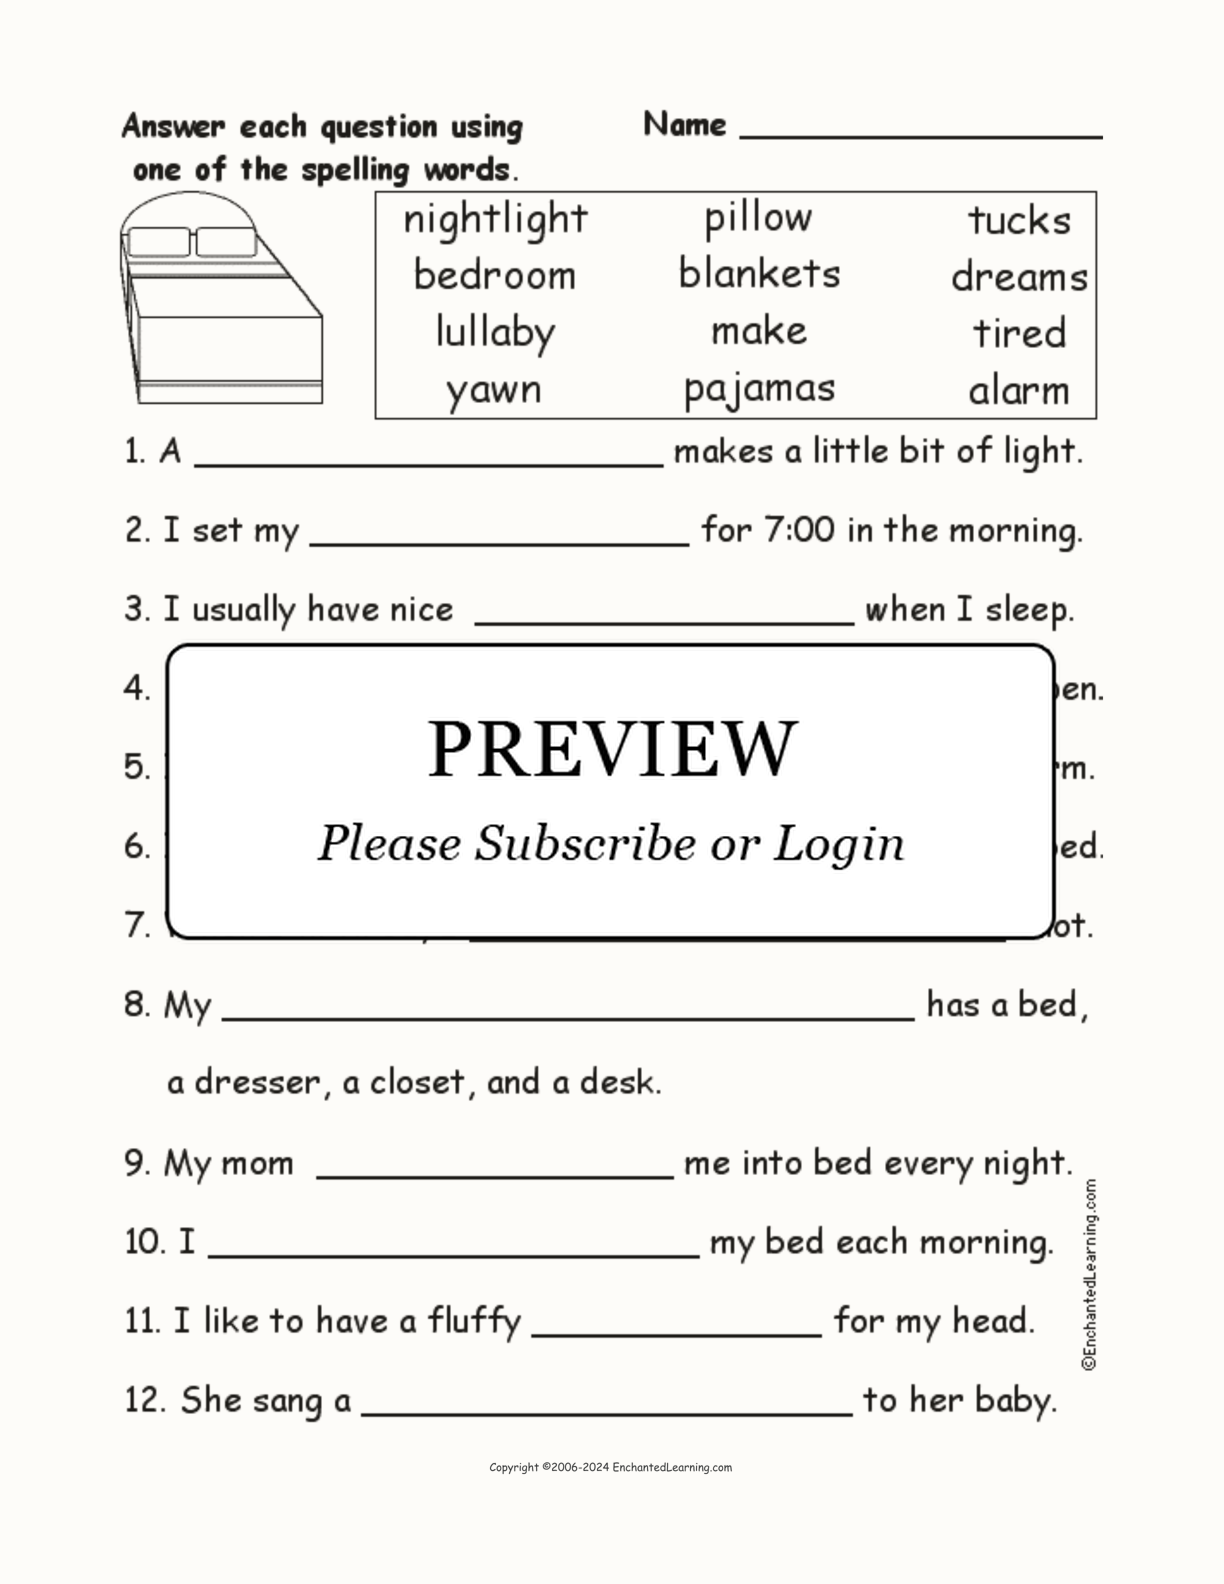 Bedtime Spelling Word Questions interactive worksheet page 1